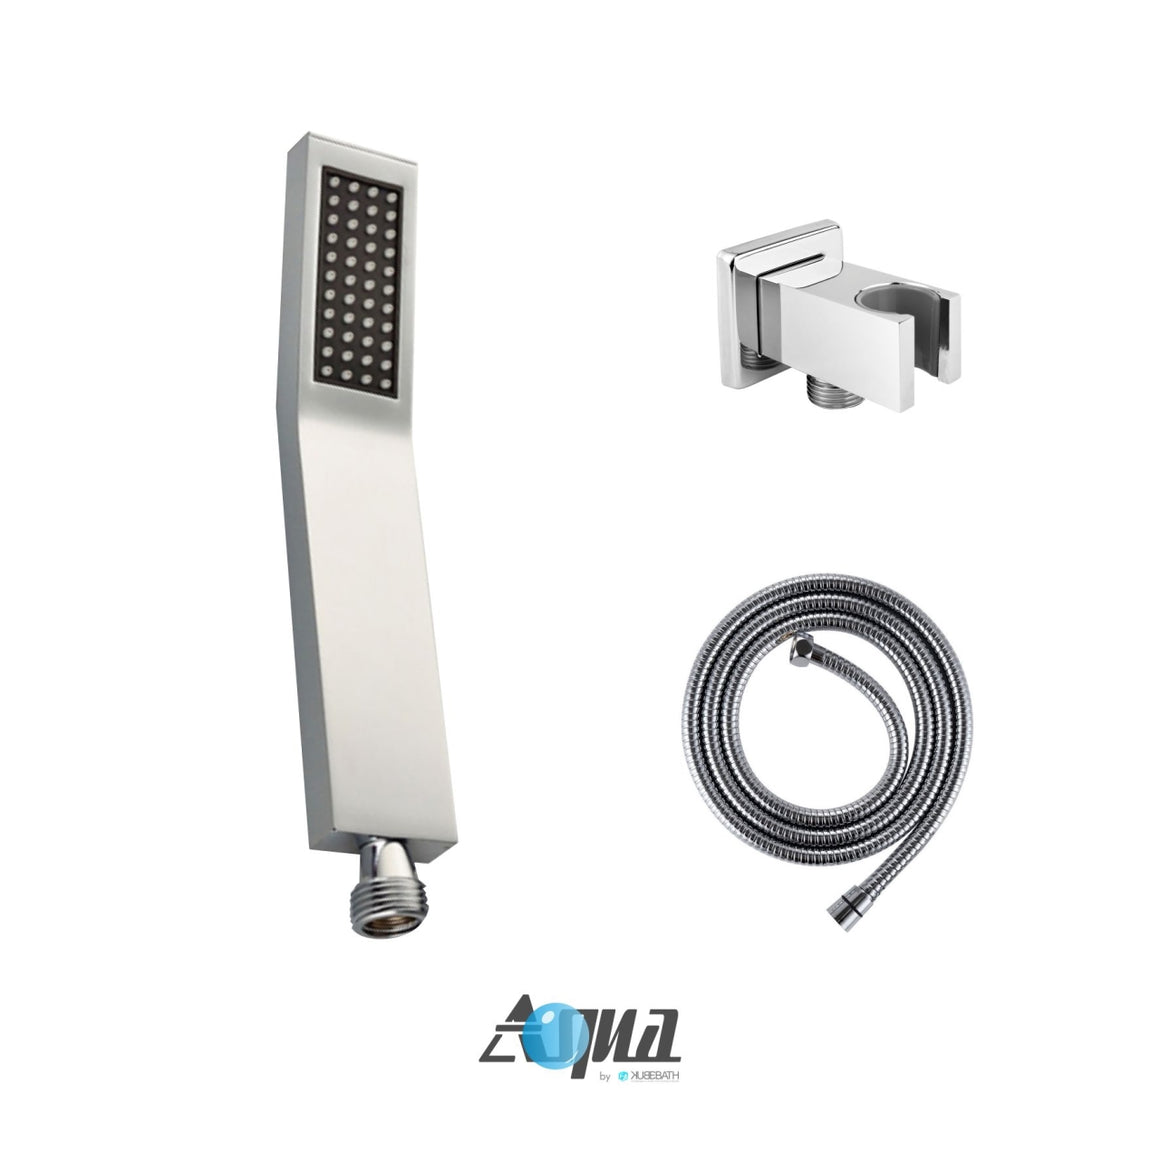 Aqua Piazza Brass Shower Set with 8" Ceiling Mount Square Rain Shower, Handheld and 4 Body Jets